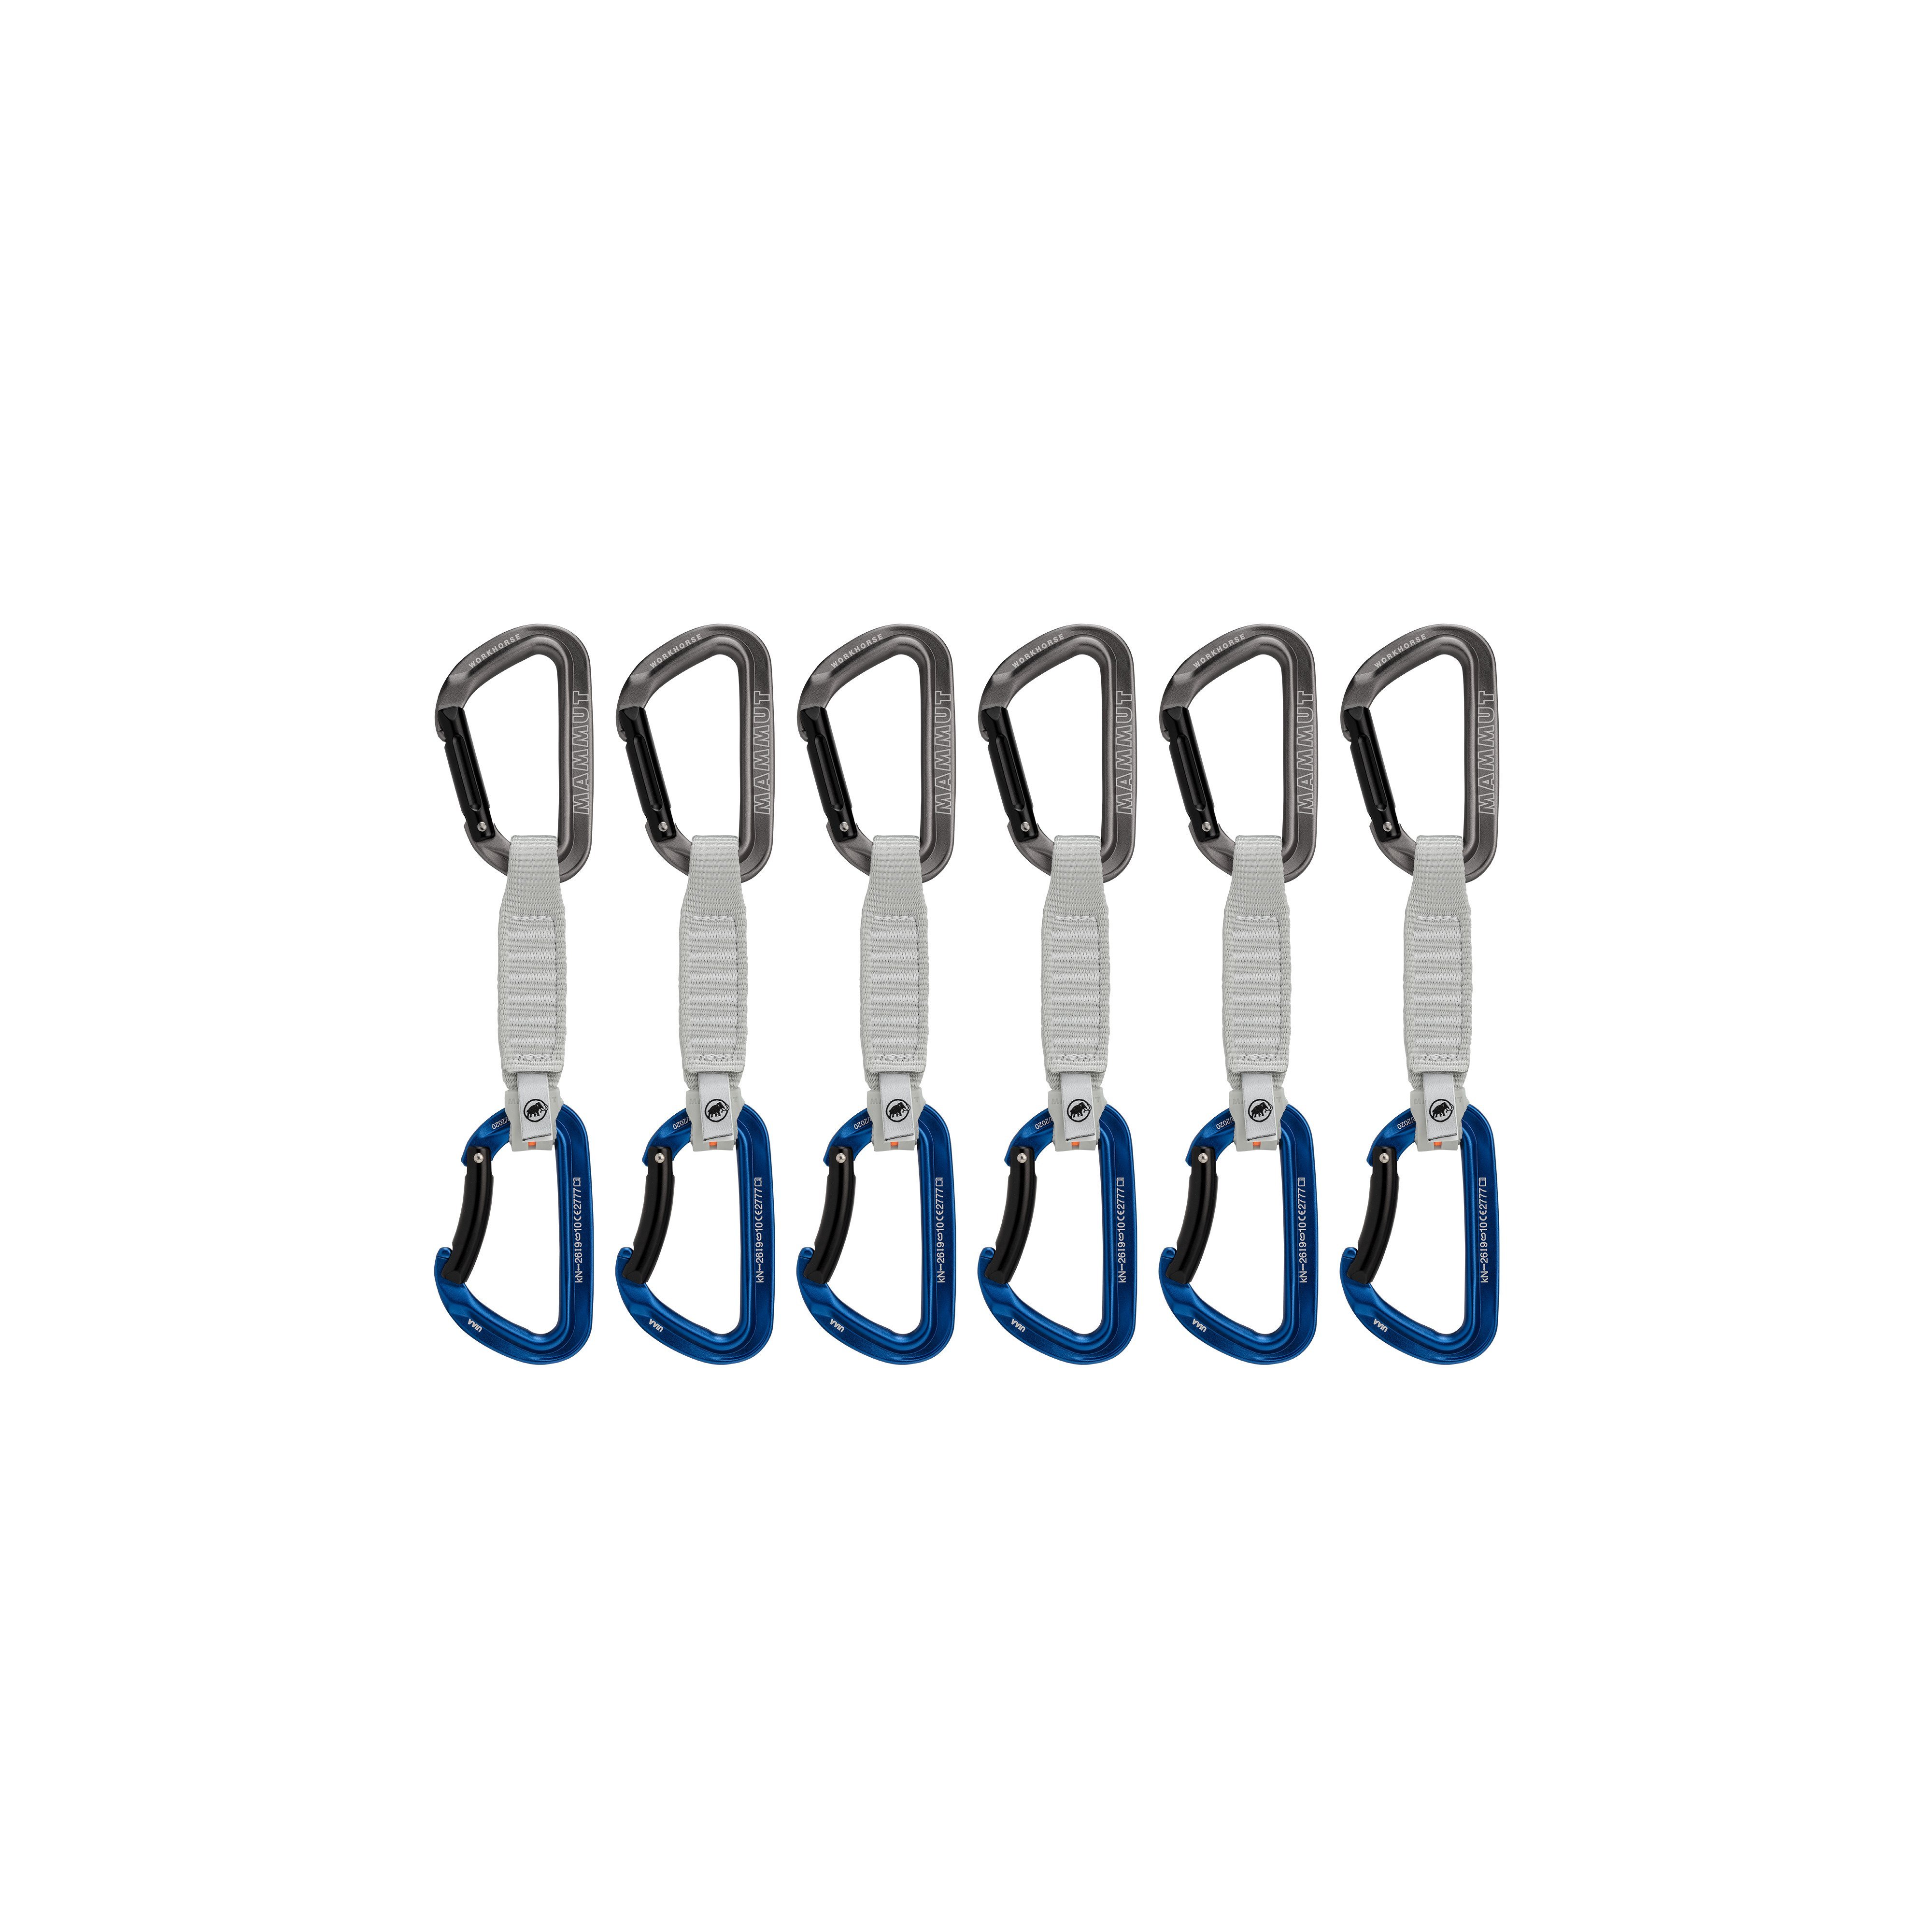 Workhorse Keylock 12 cm 6-Pack Quickdraws - grey-blue, 12 cm product image